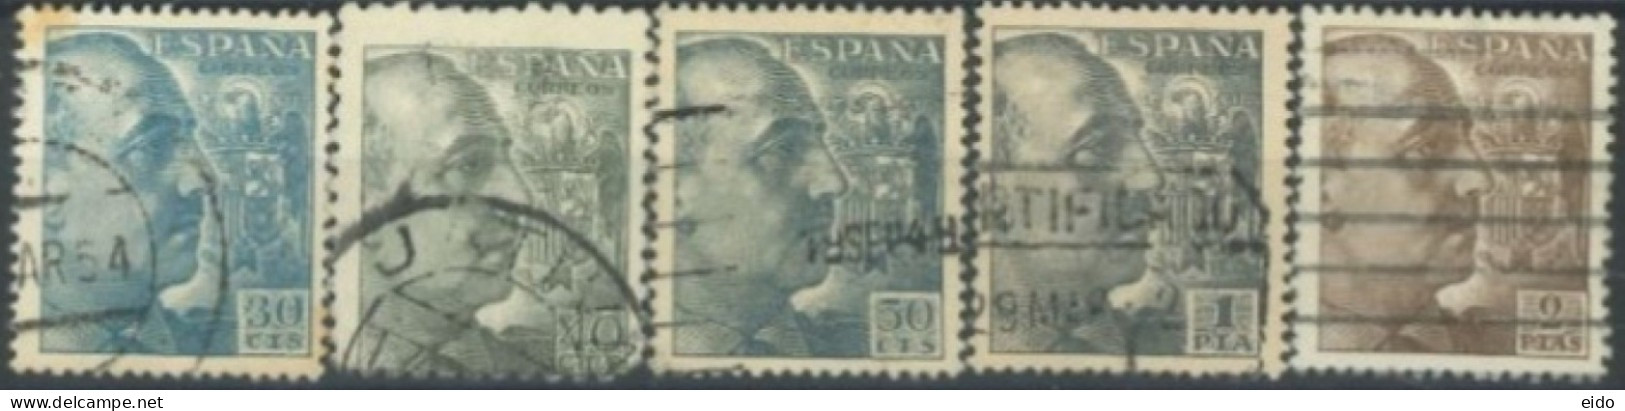 SPAIN, 1939/40, GENERAL FRANCISCO FRANCO STAMPS SET OF 5, USED. - Used Stamps